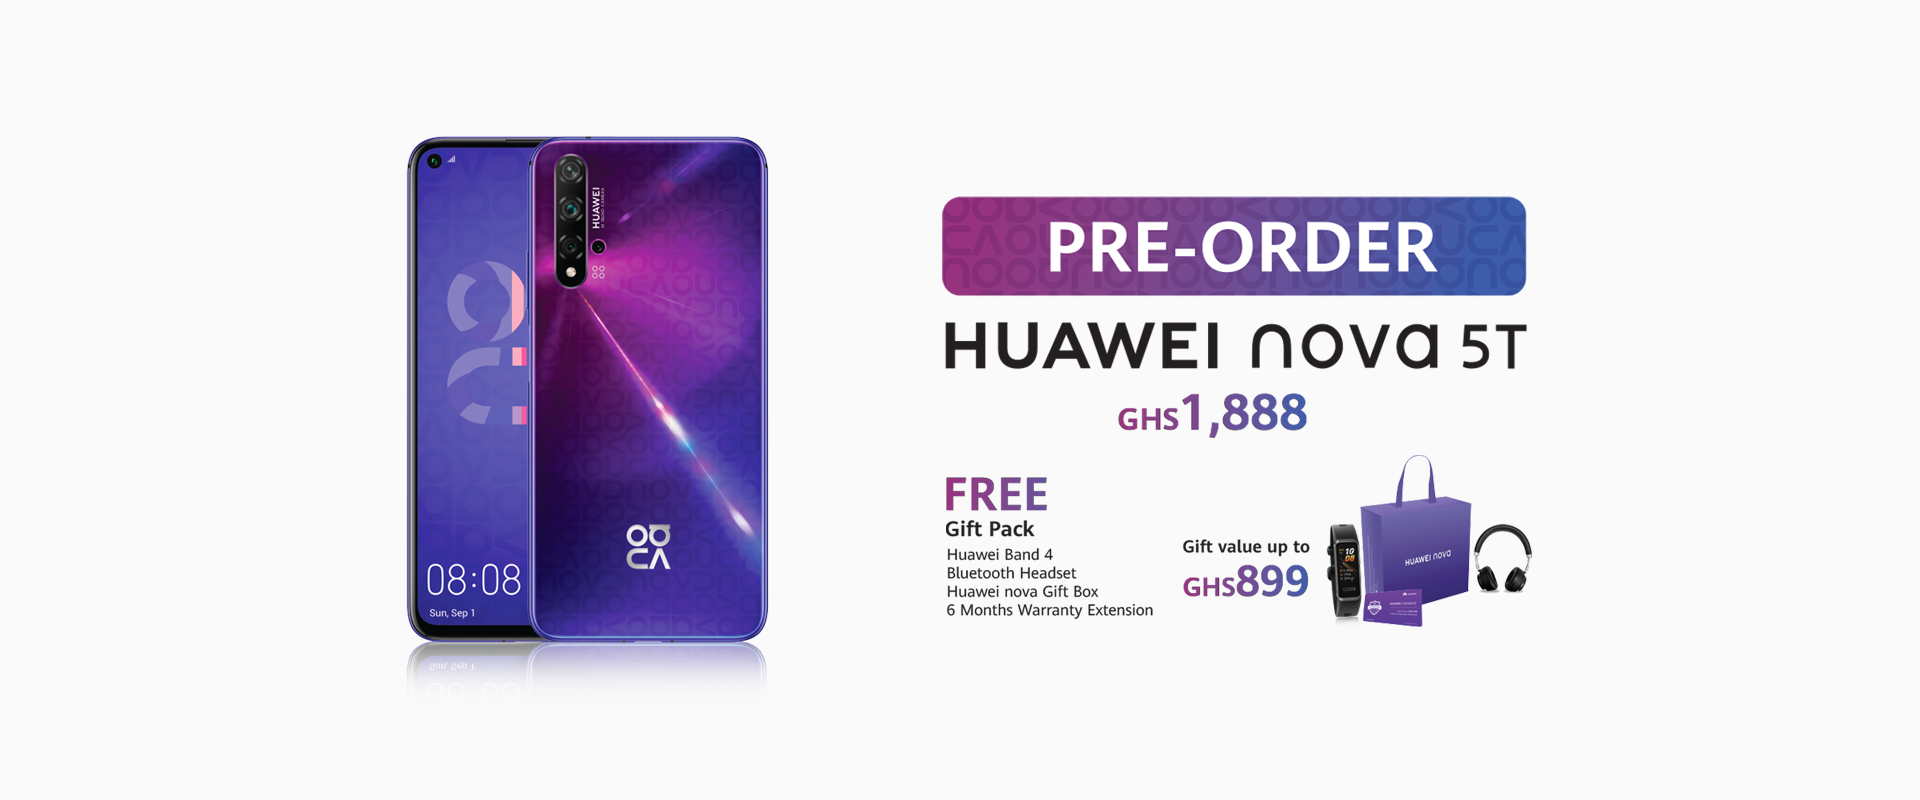 How To Pre-Order For The Huawei Nova 5T